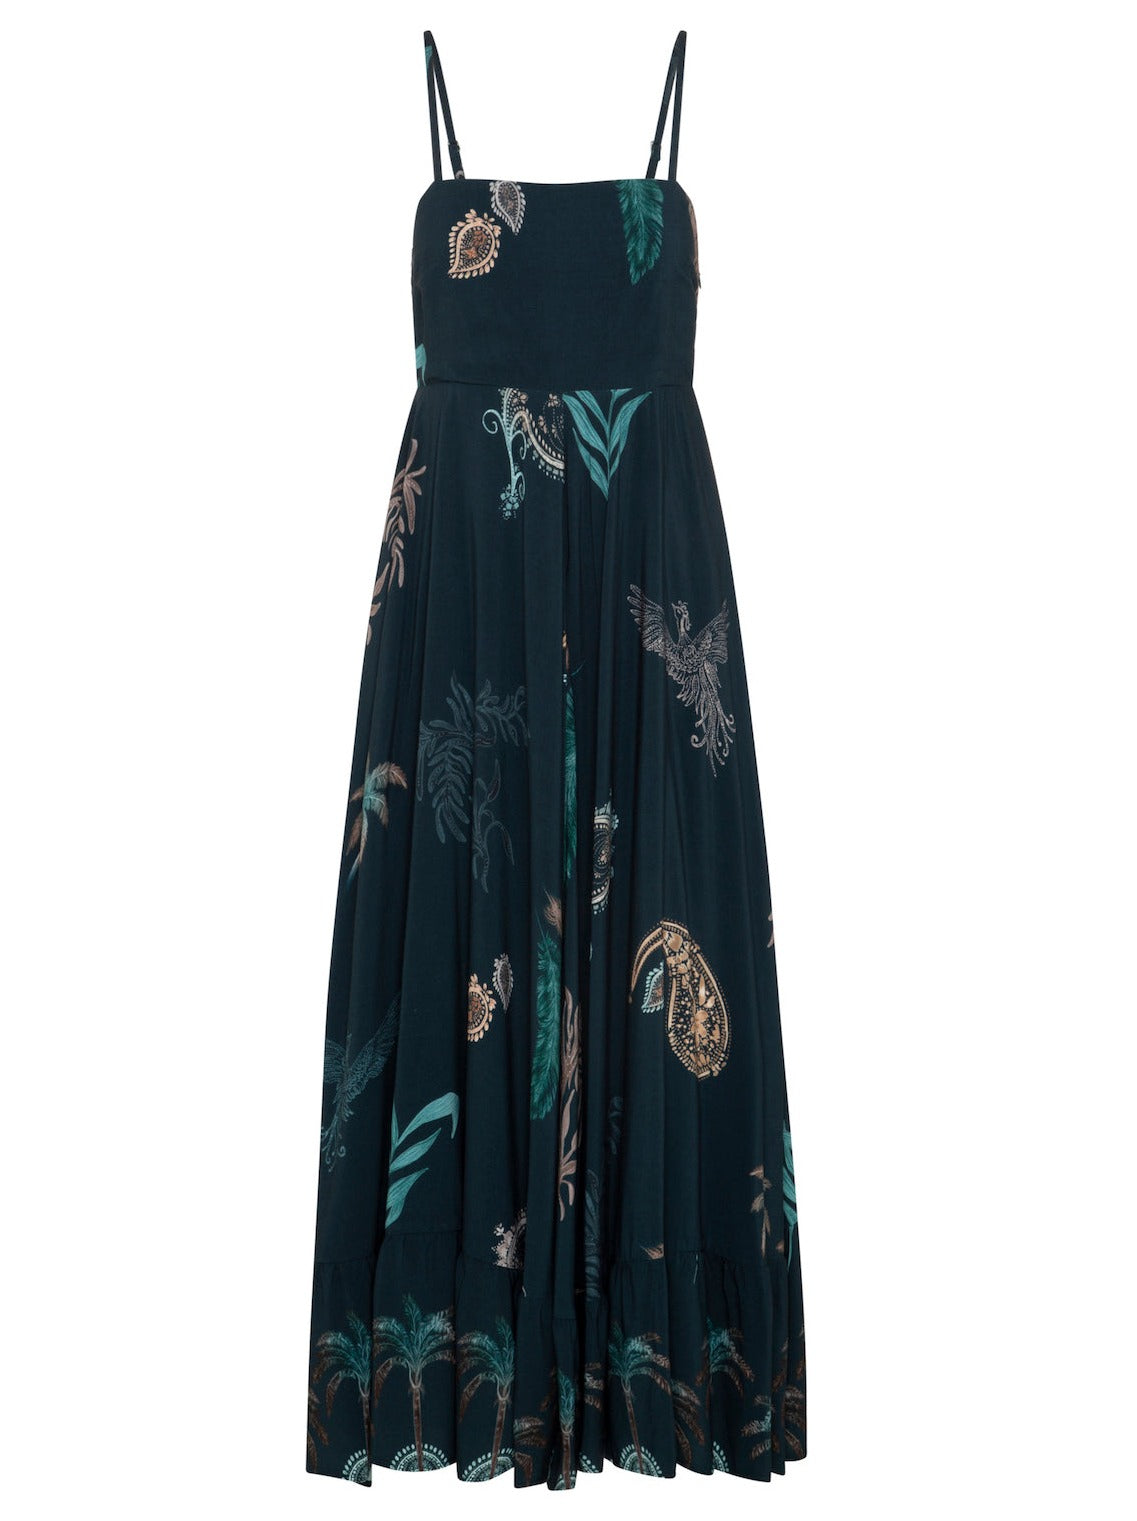 Womens boho strappy maxi dress teal palm tree print front view ghost mannequin